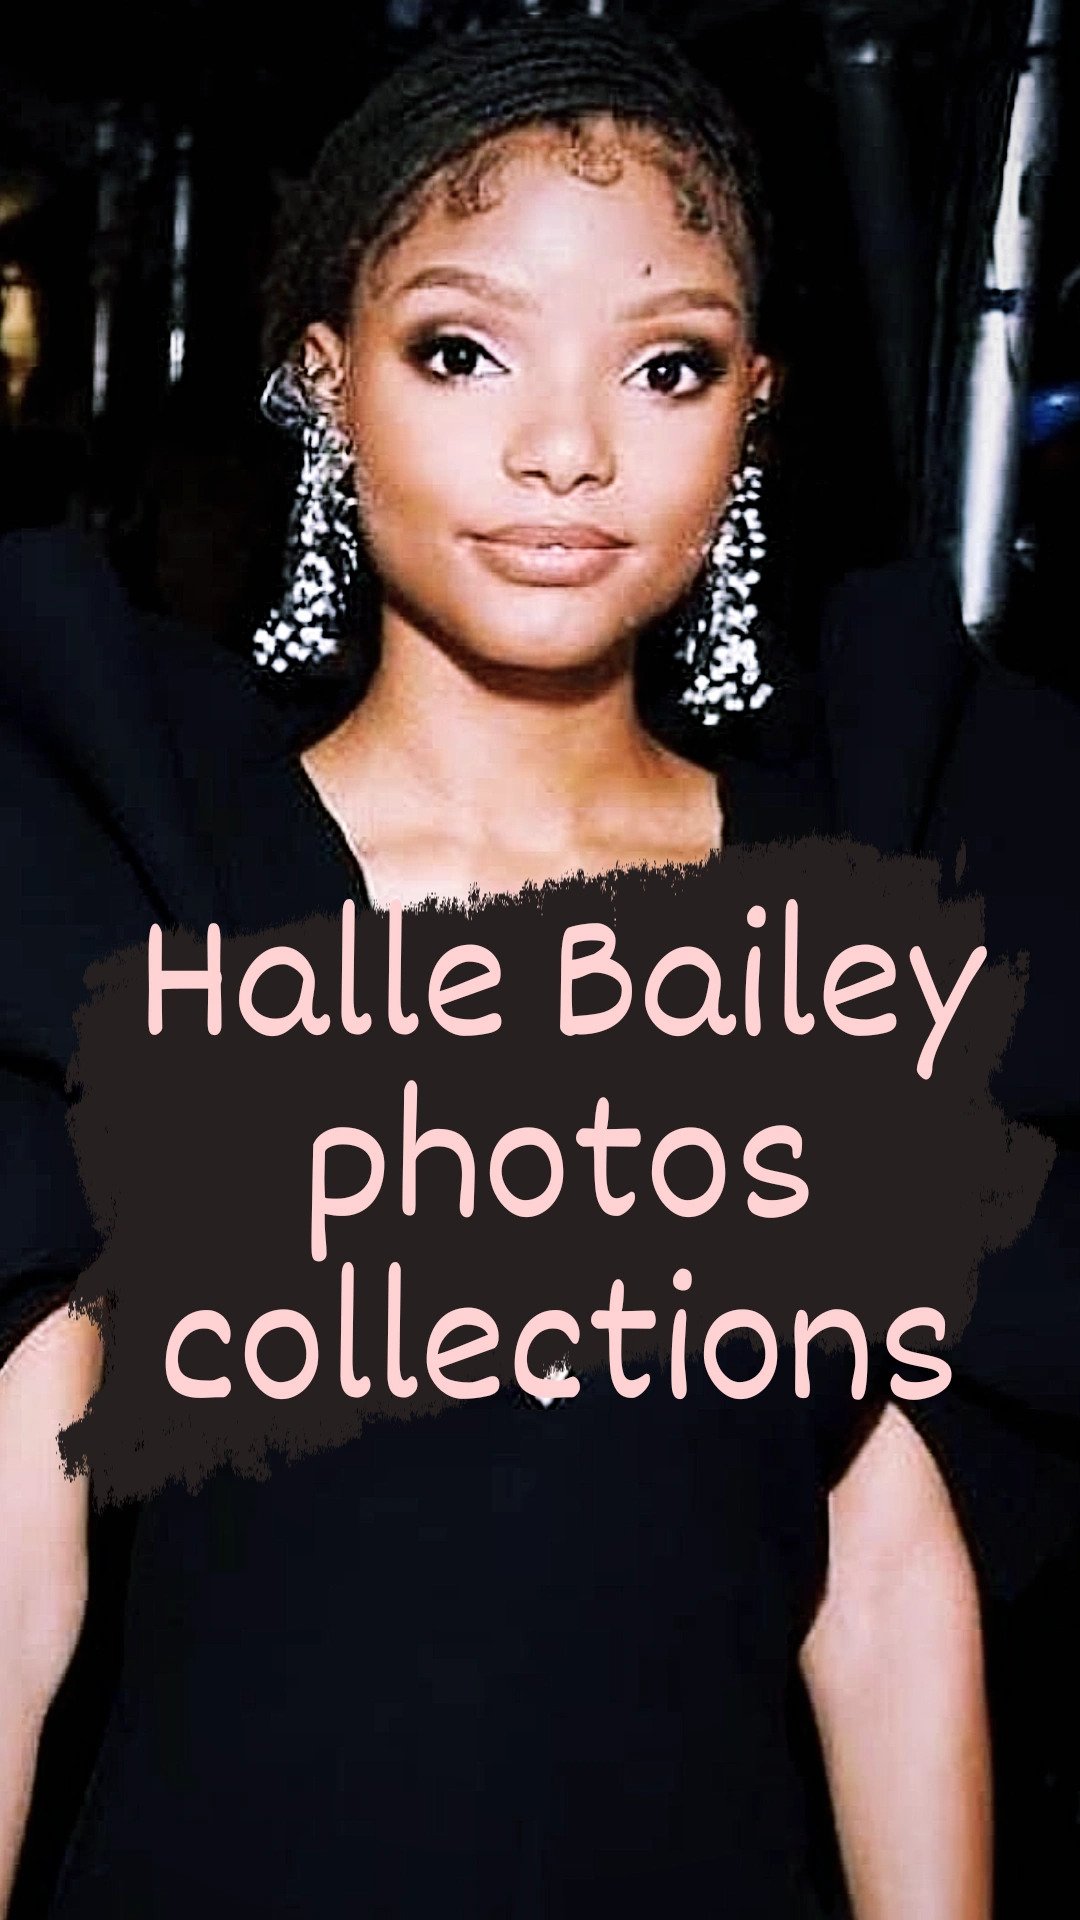 The Power of Passion: Halle Bailey's Impact in the Entertainment Industry